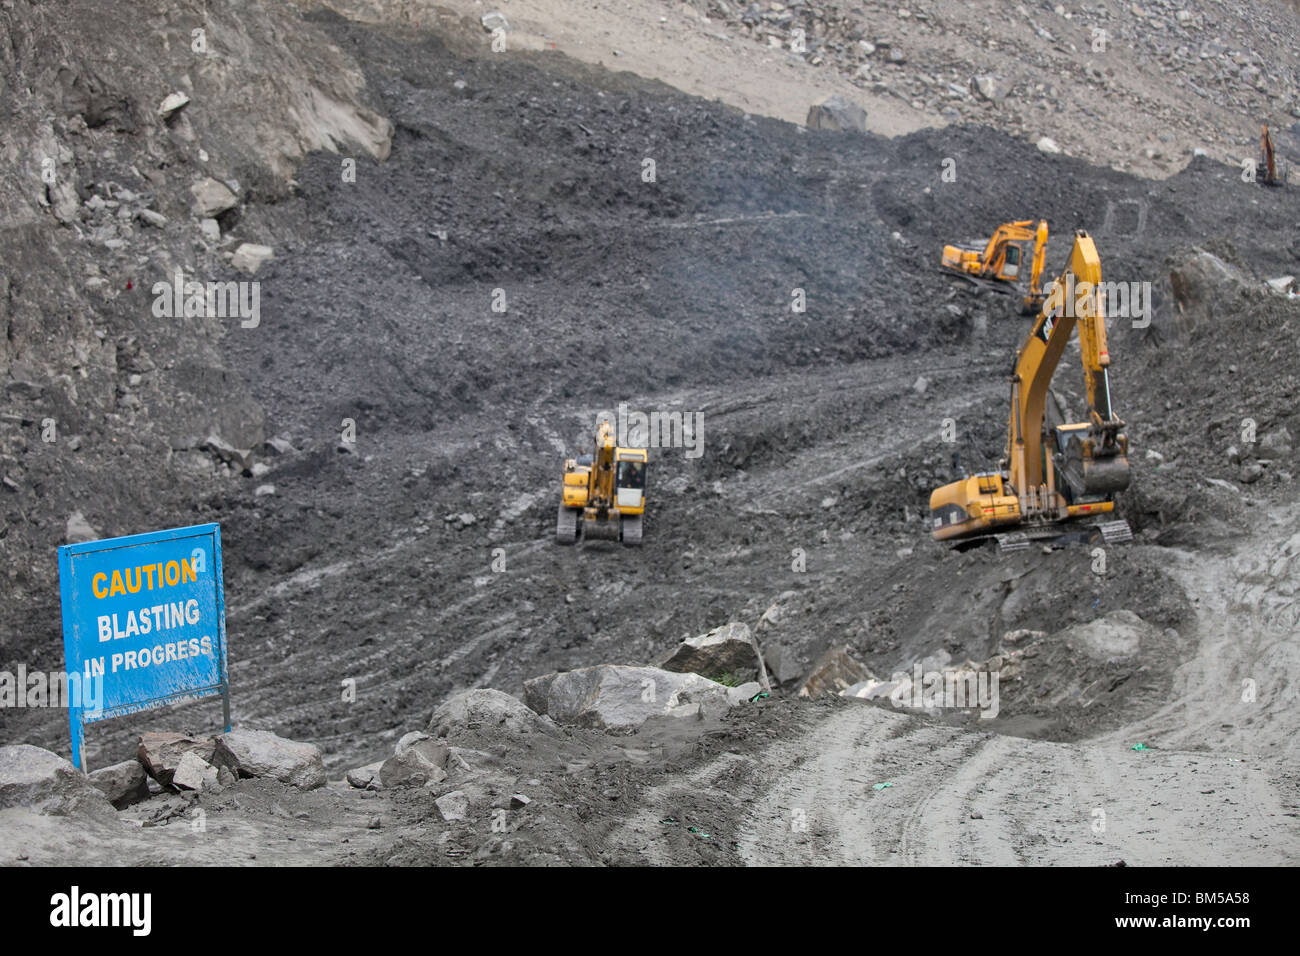 The spillway being dug at the landslide area at Attabad which blocks the Karakoram Highway, Hunza, Pakistan Stock Photo